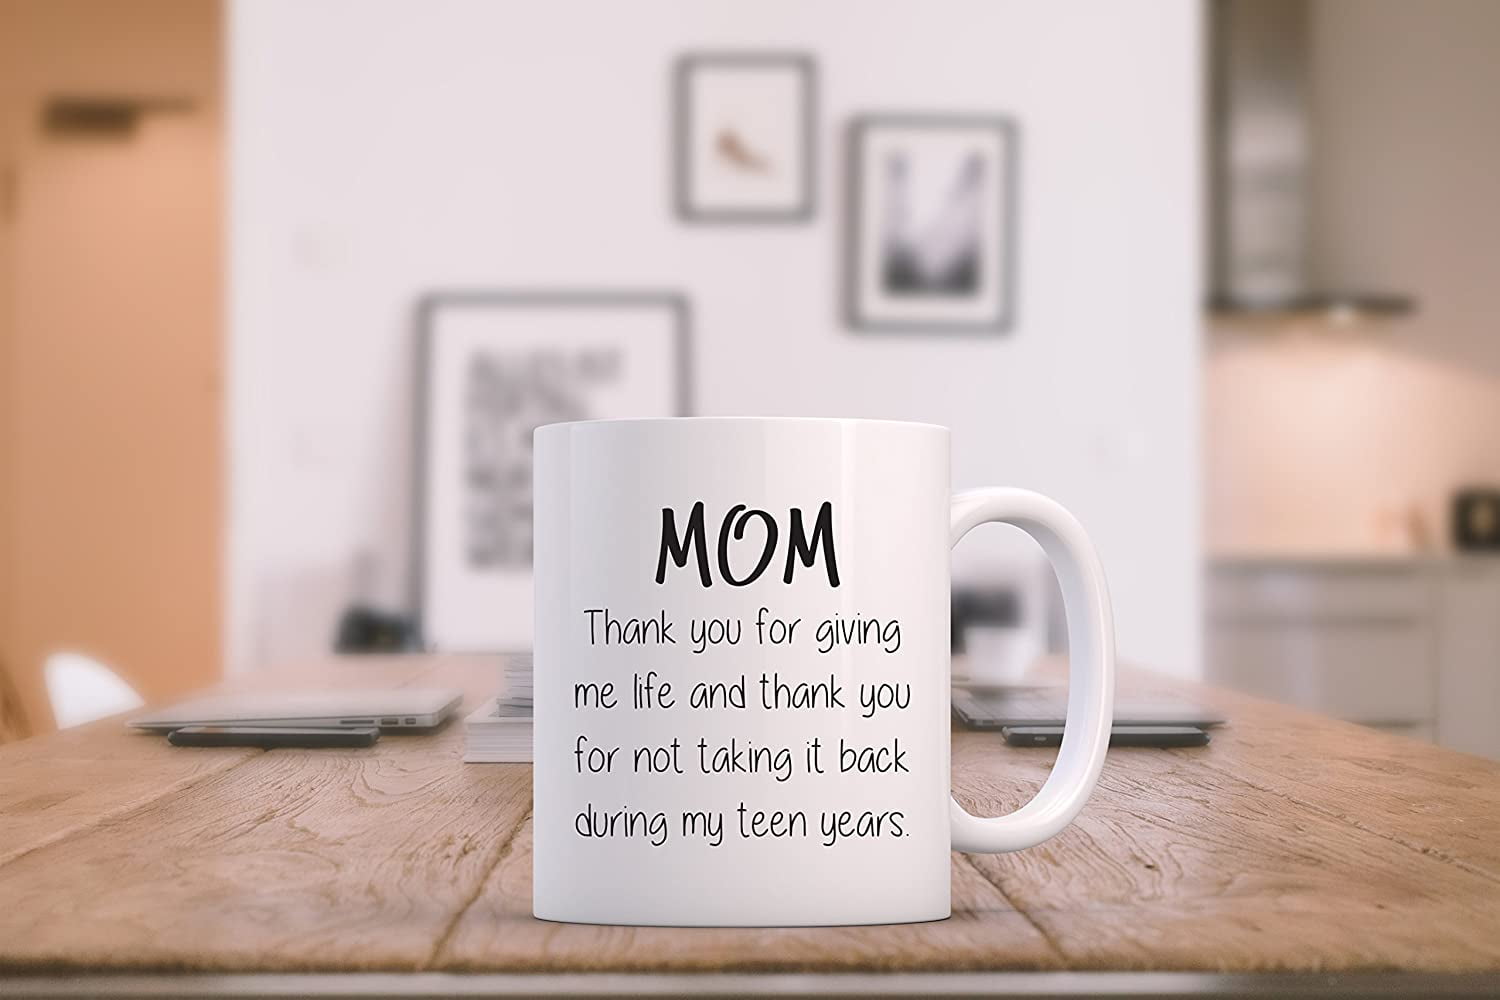 Funny Mom Gifts, Gift From Daughter, Gifts for Mom, Mother's Day Gift,  Funny Mom Mug, Funny Mom Gift, Mom Mug, Best Mom Ever, Mother Gift -   Israel